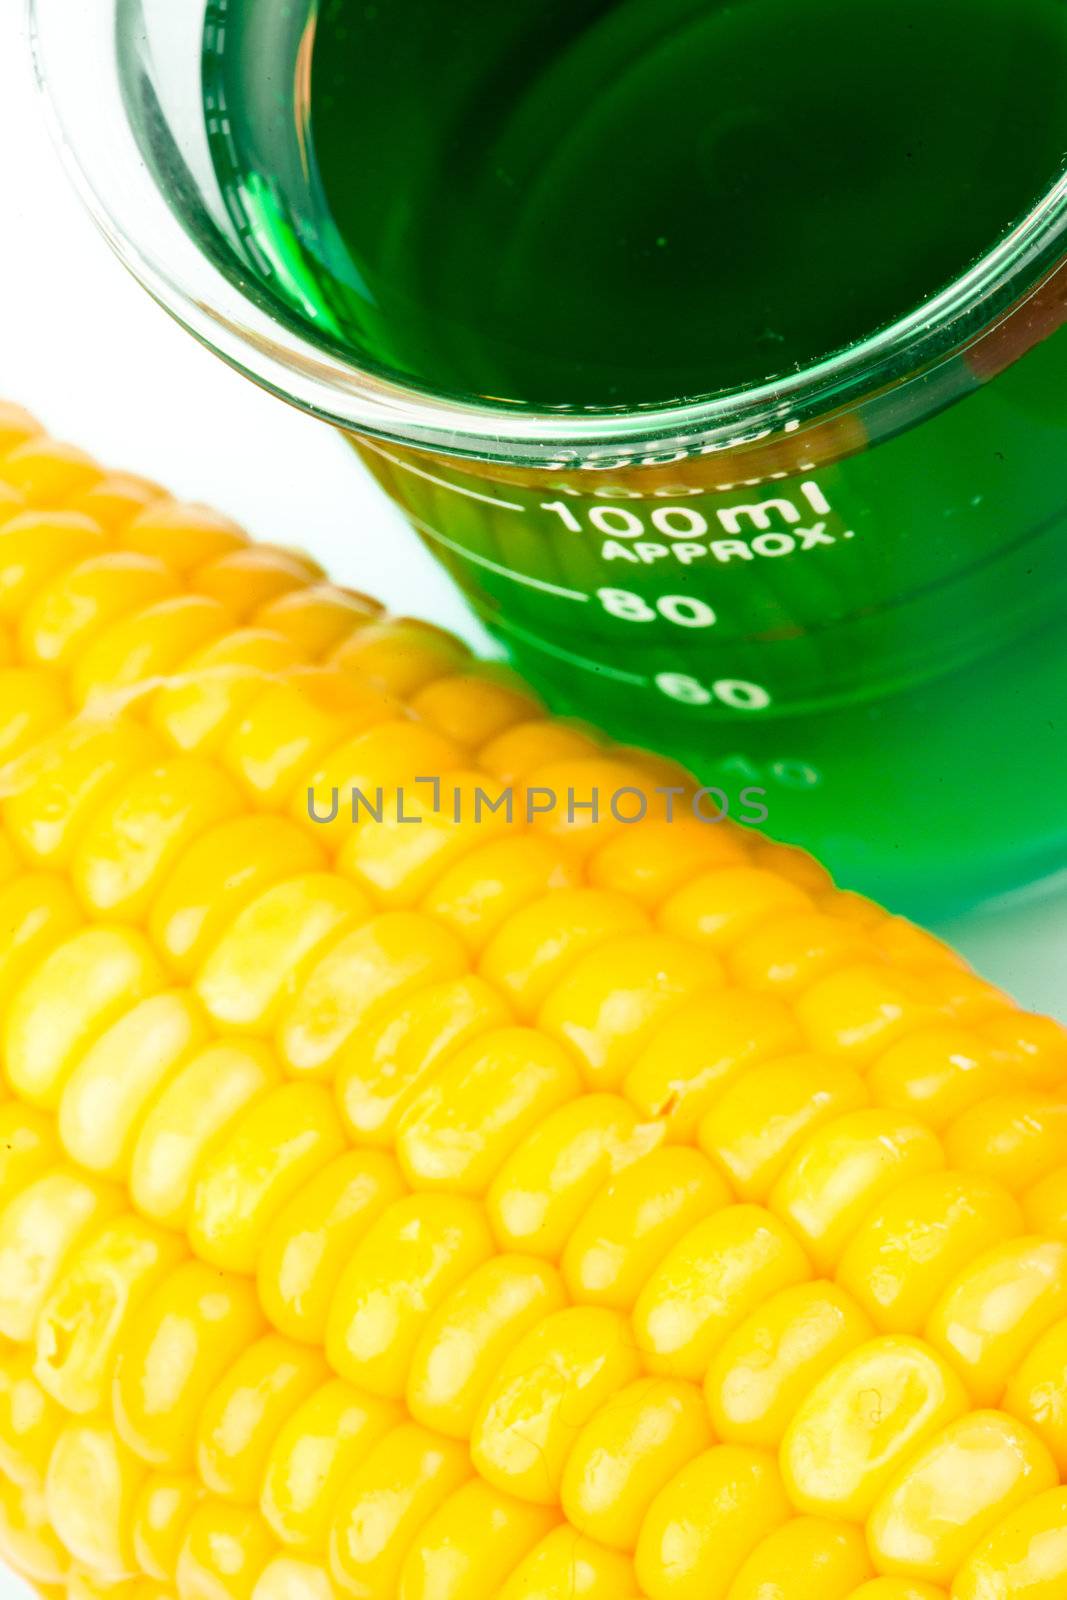 Beaker next to corn against a white background